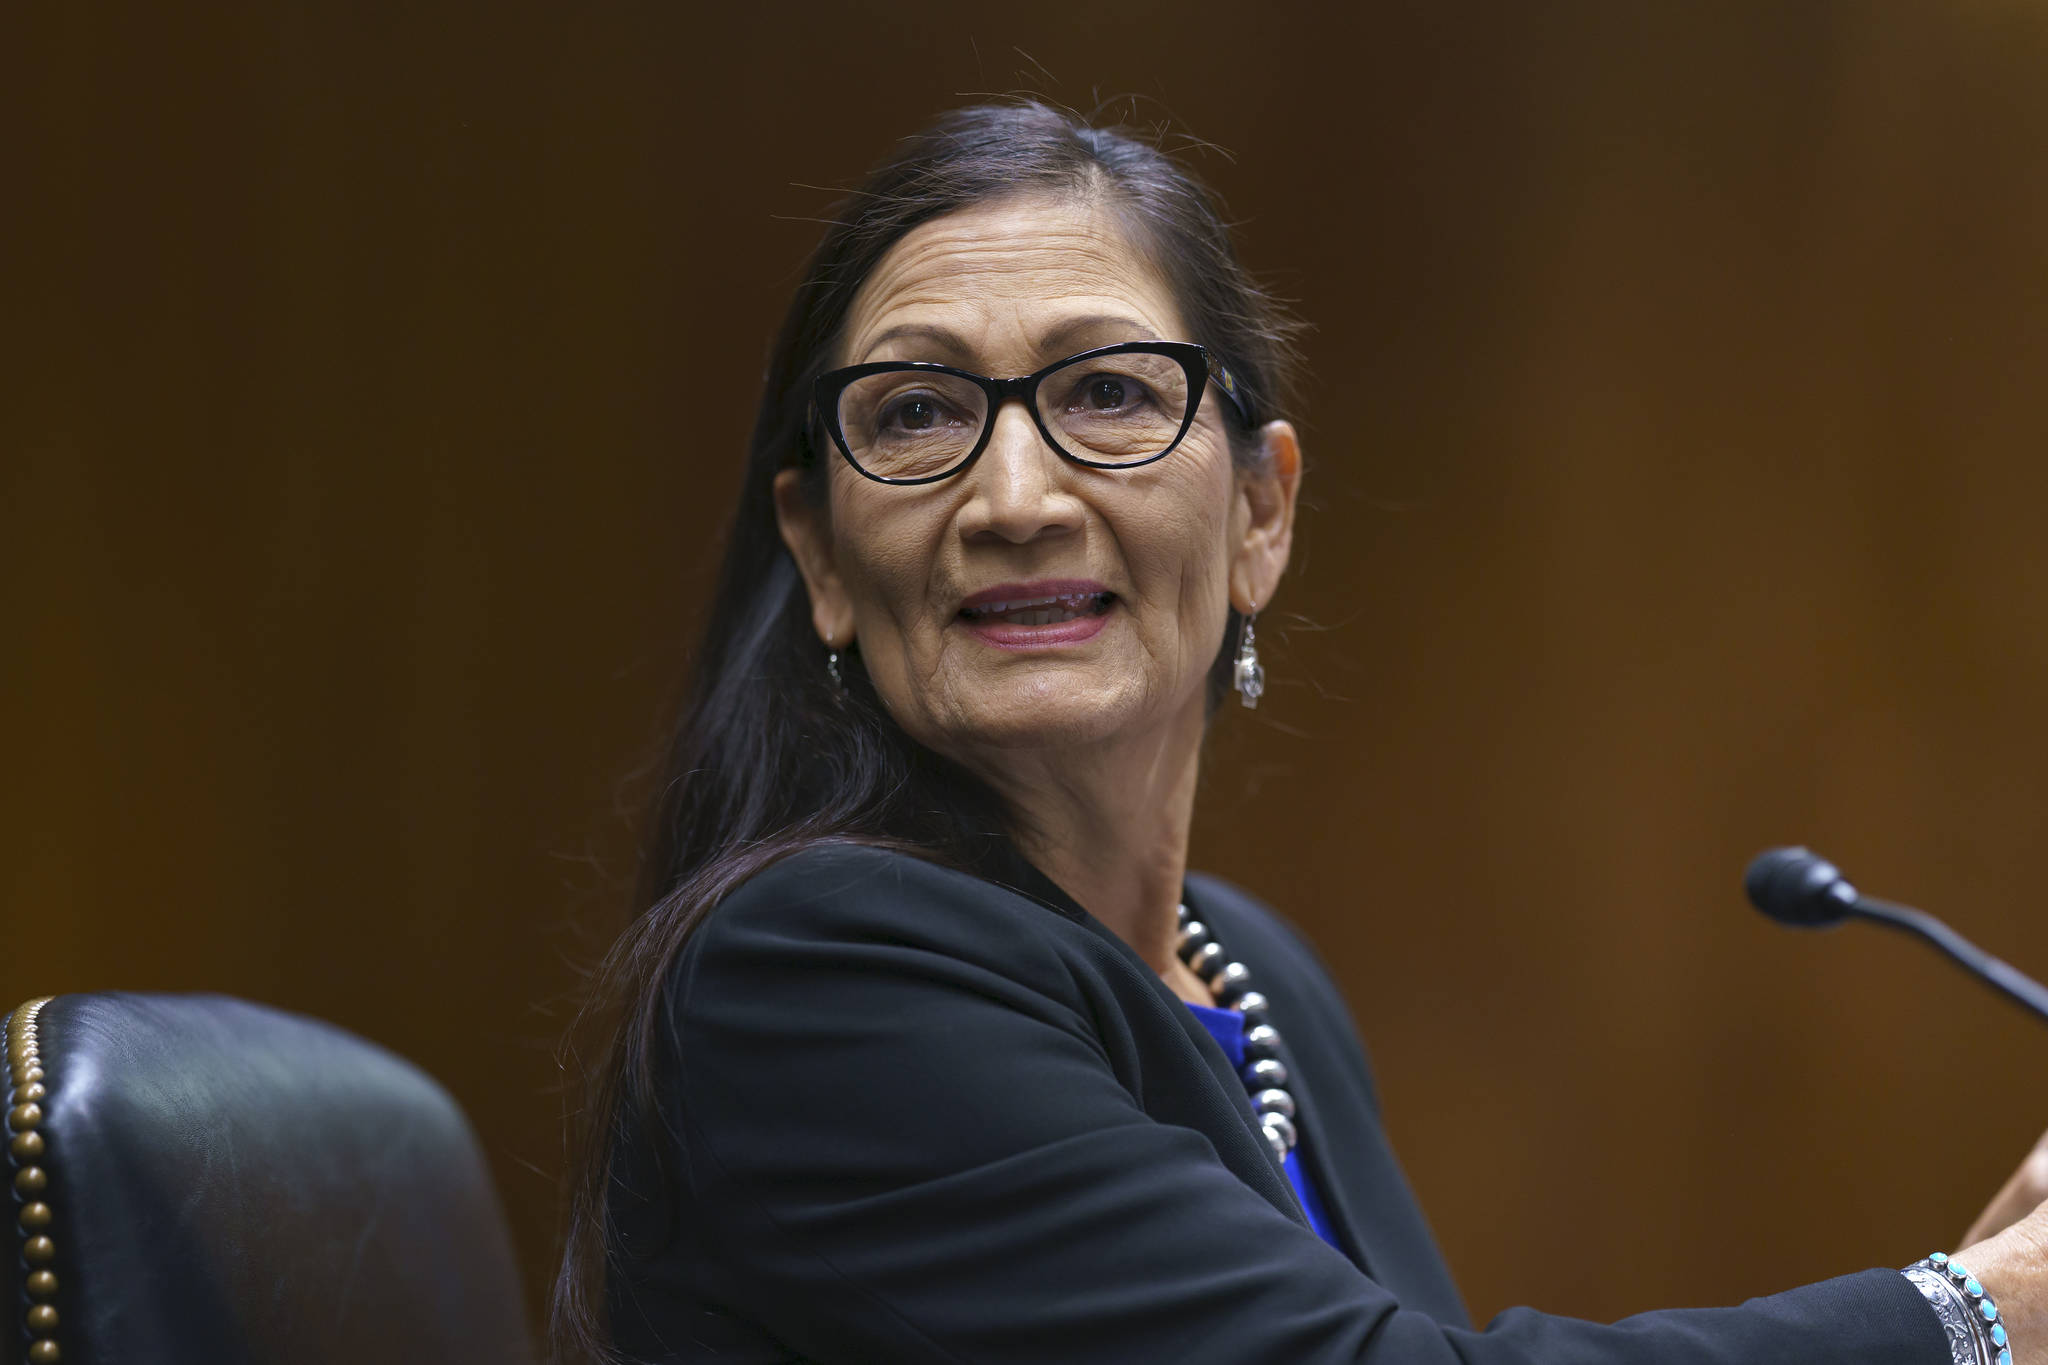 Interior Secretary Deb Haaland appears before the Senate Appropriations Committee, at the Capitol in Washington, Wednesday, June 16, 2021. (AP Photo/J. Scott Applewhite)